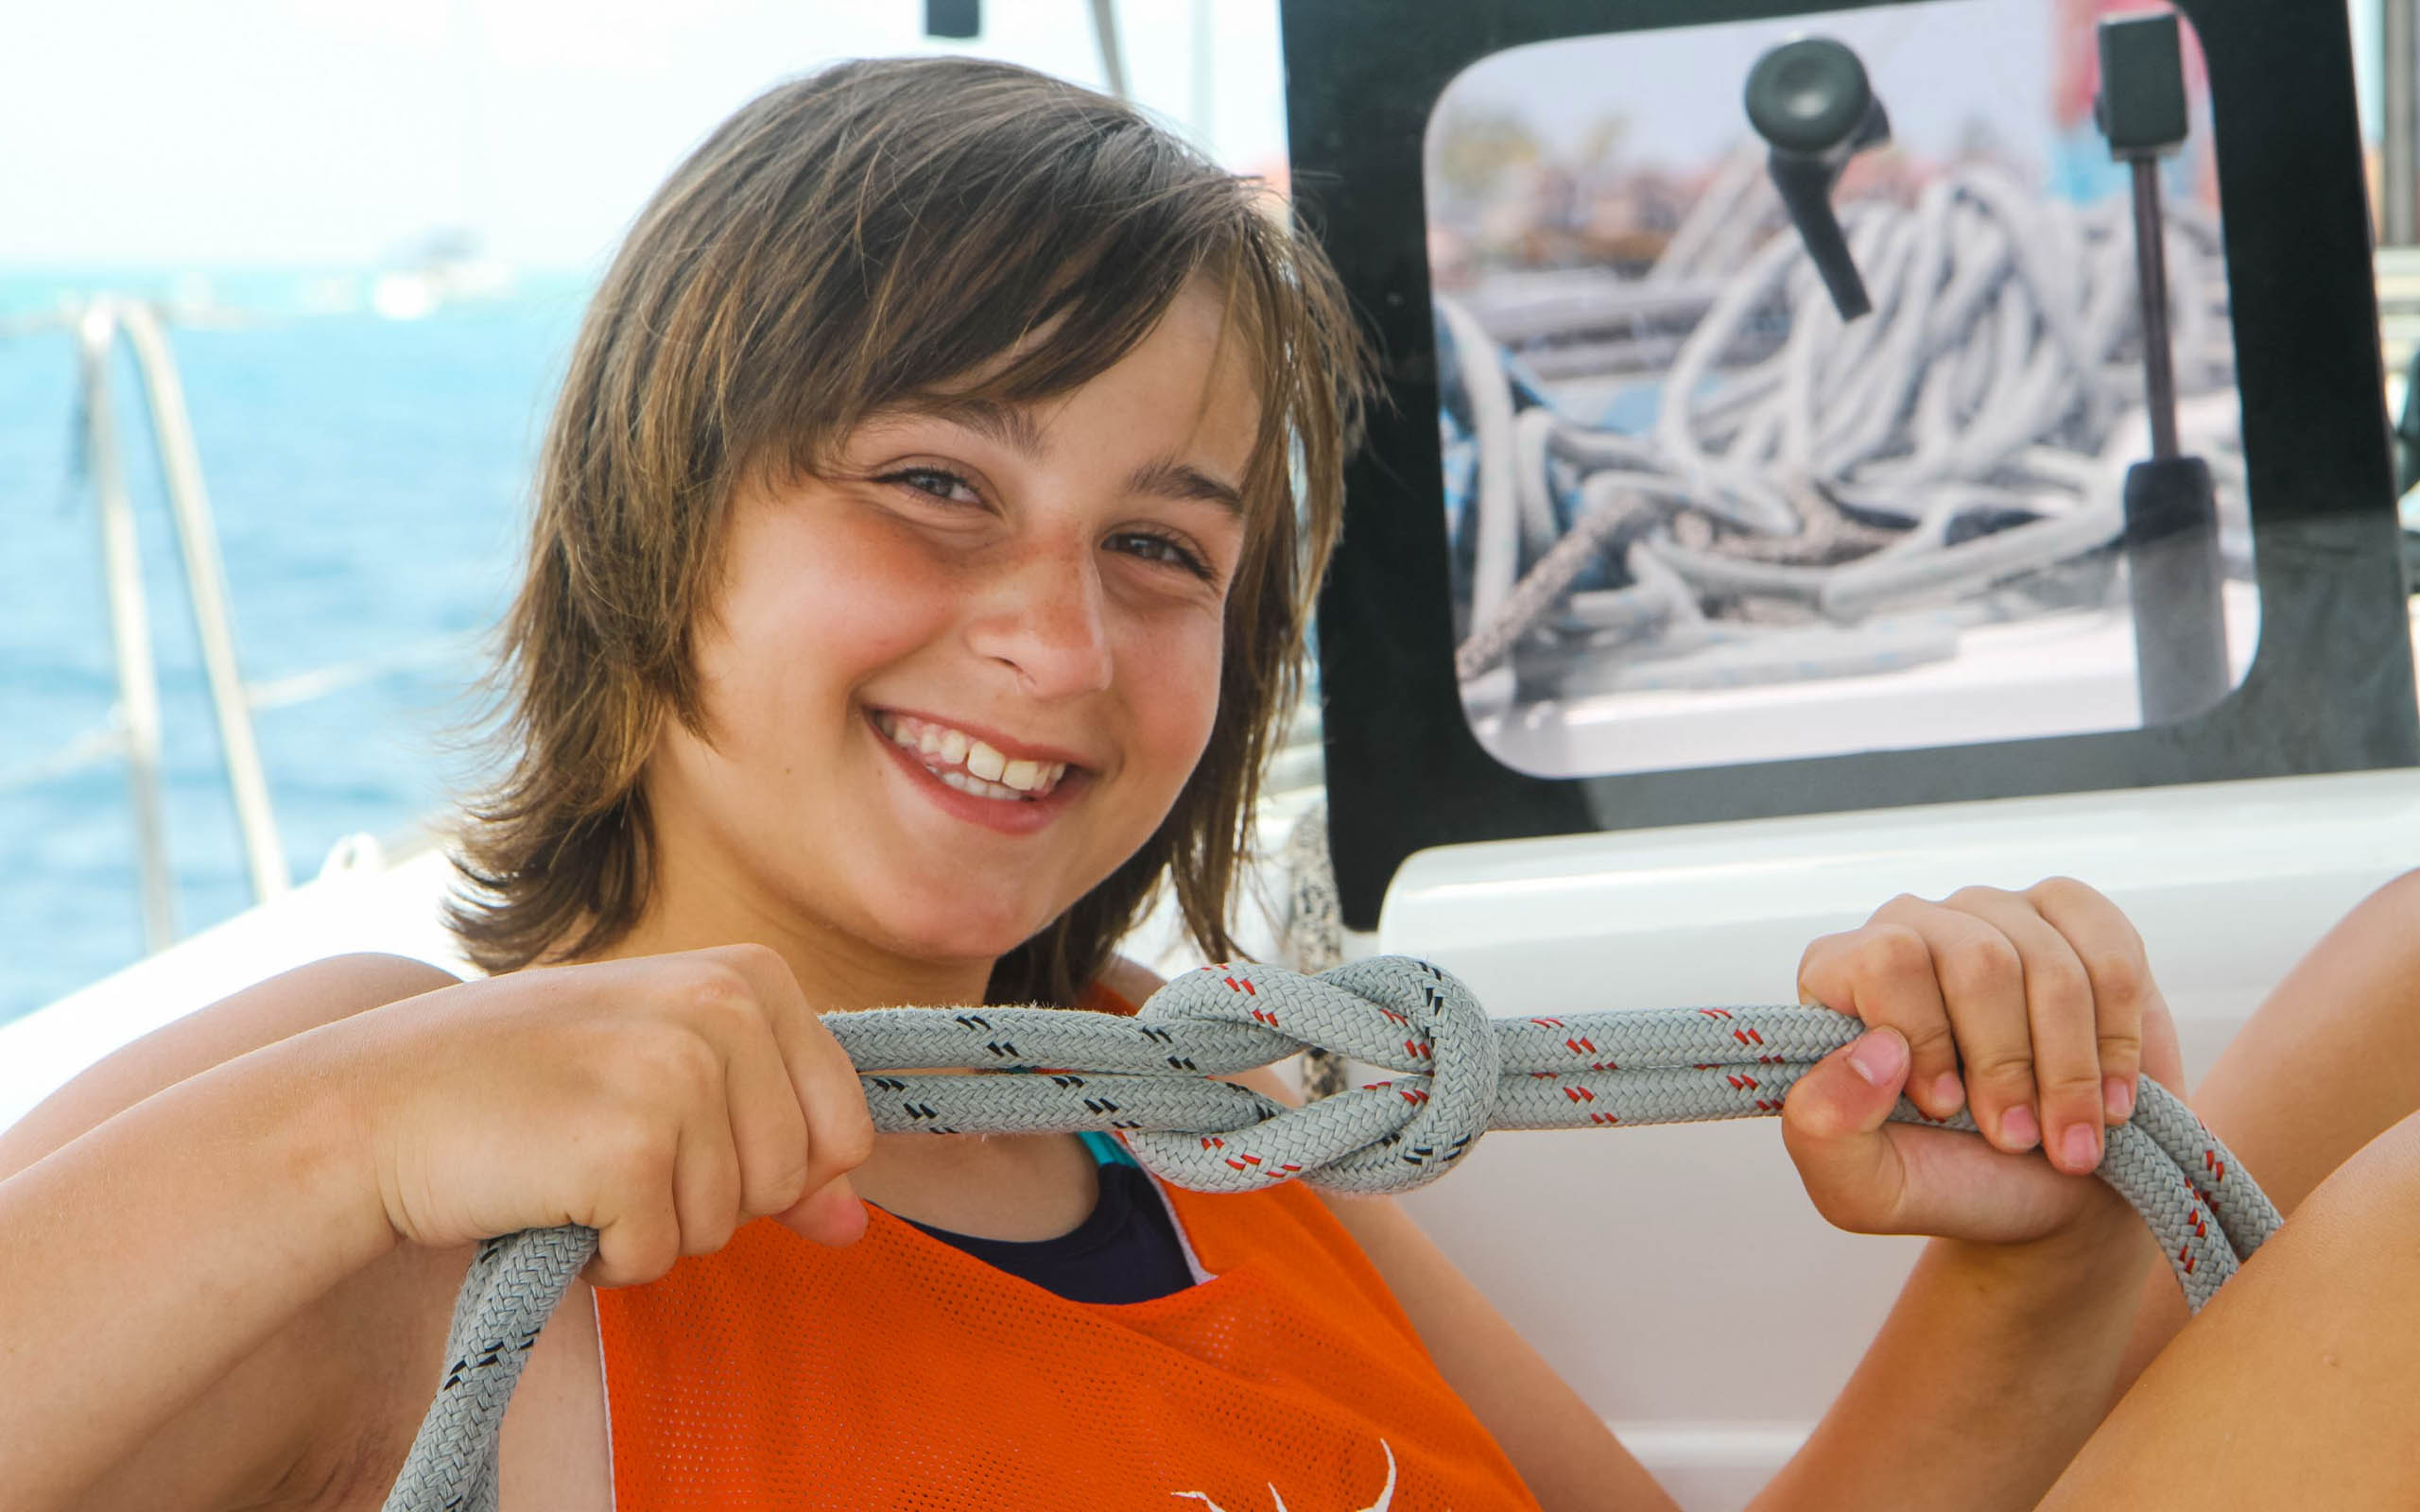 A boy holding a rope on a boat.